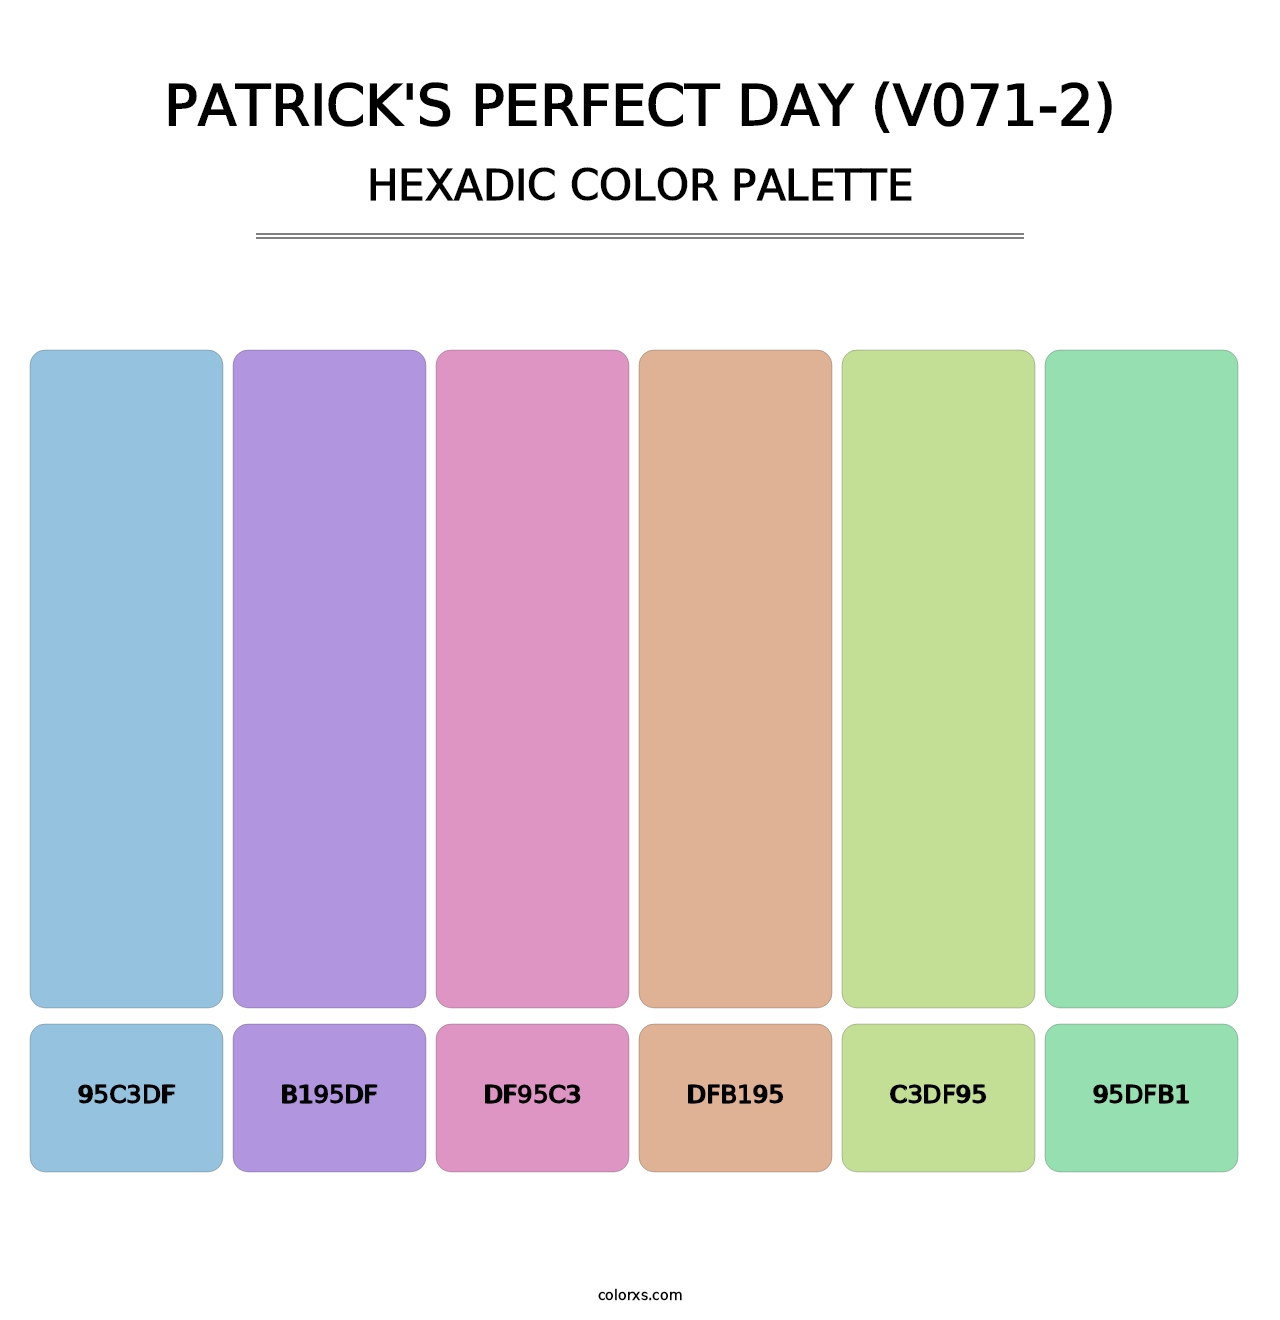 Patrick's Perfect Day (V071-2) - Hexadic Color Palette